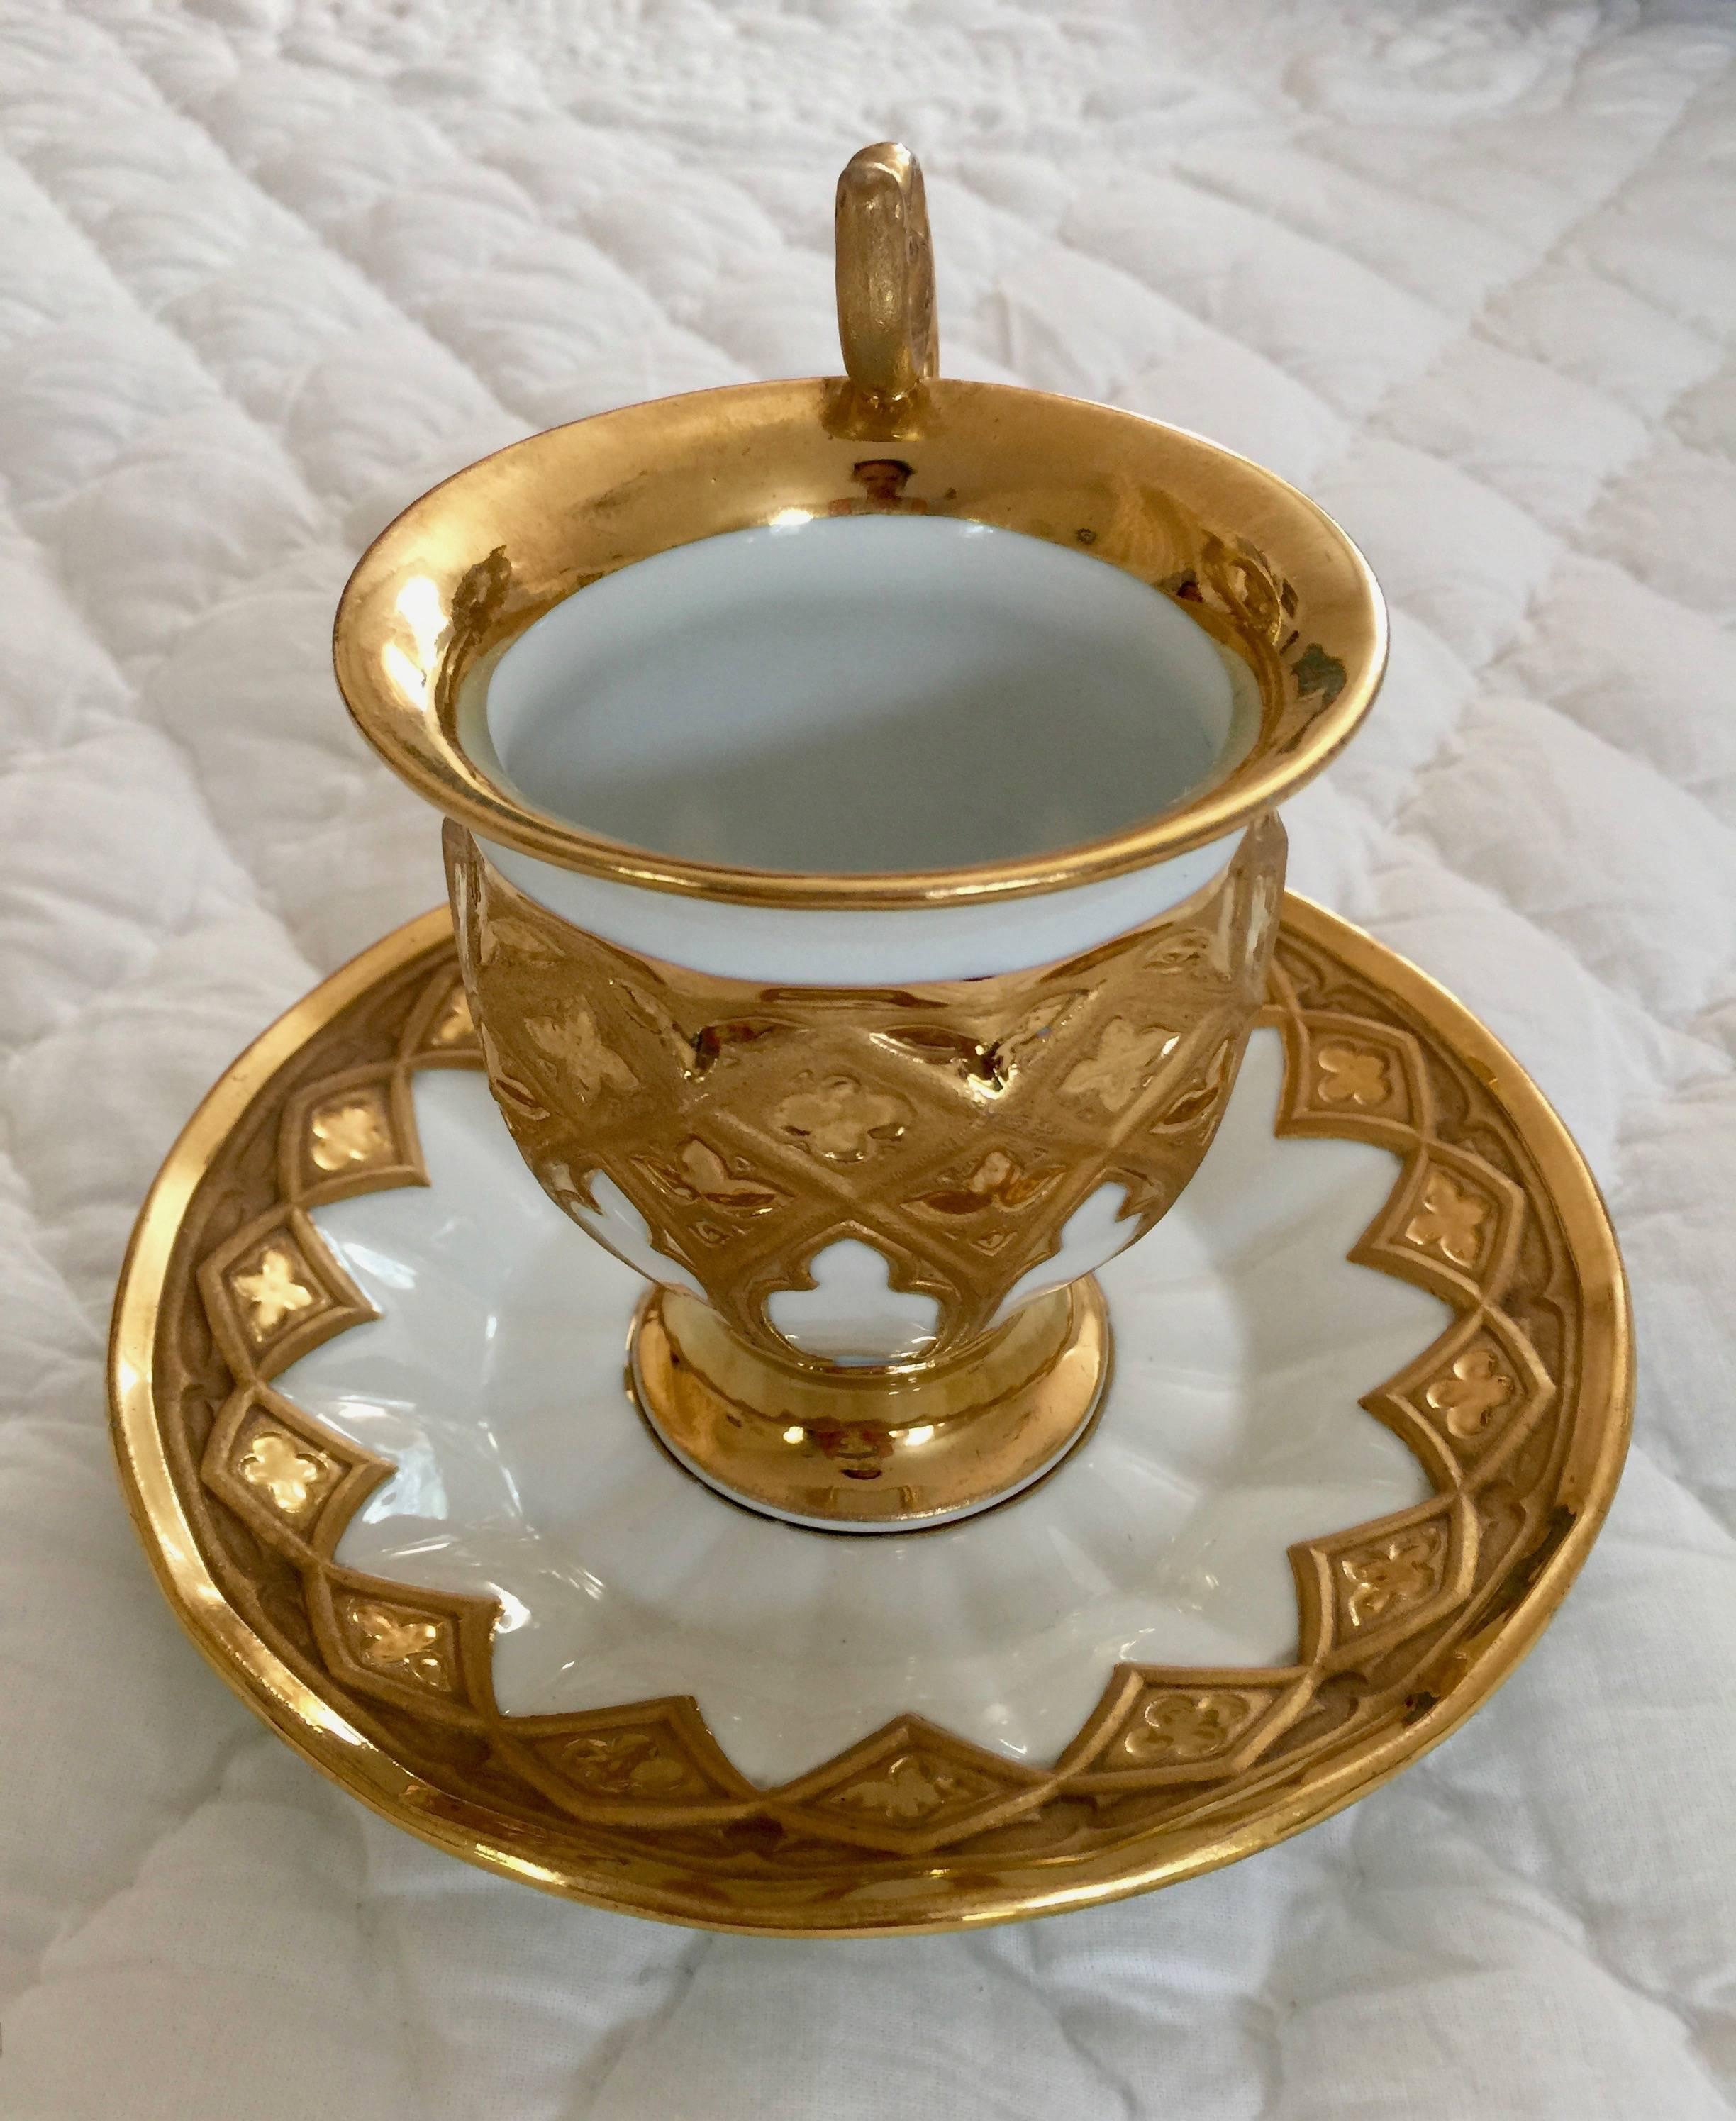 19th century antique Meissen Porcelain Gothic style cabinet cup and saucer
Gold gilded
Saucer 6